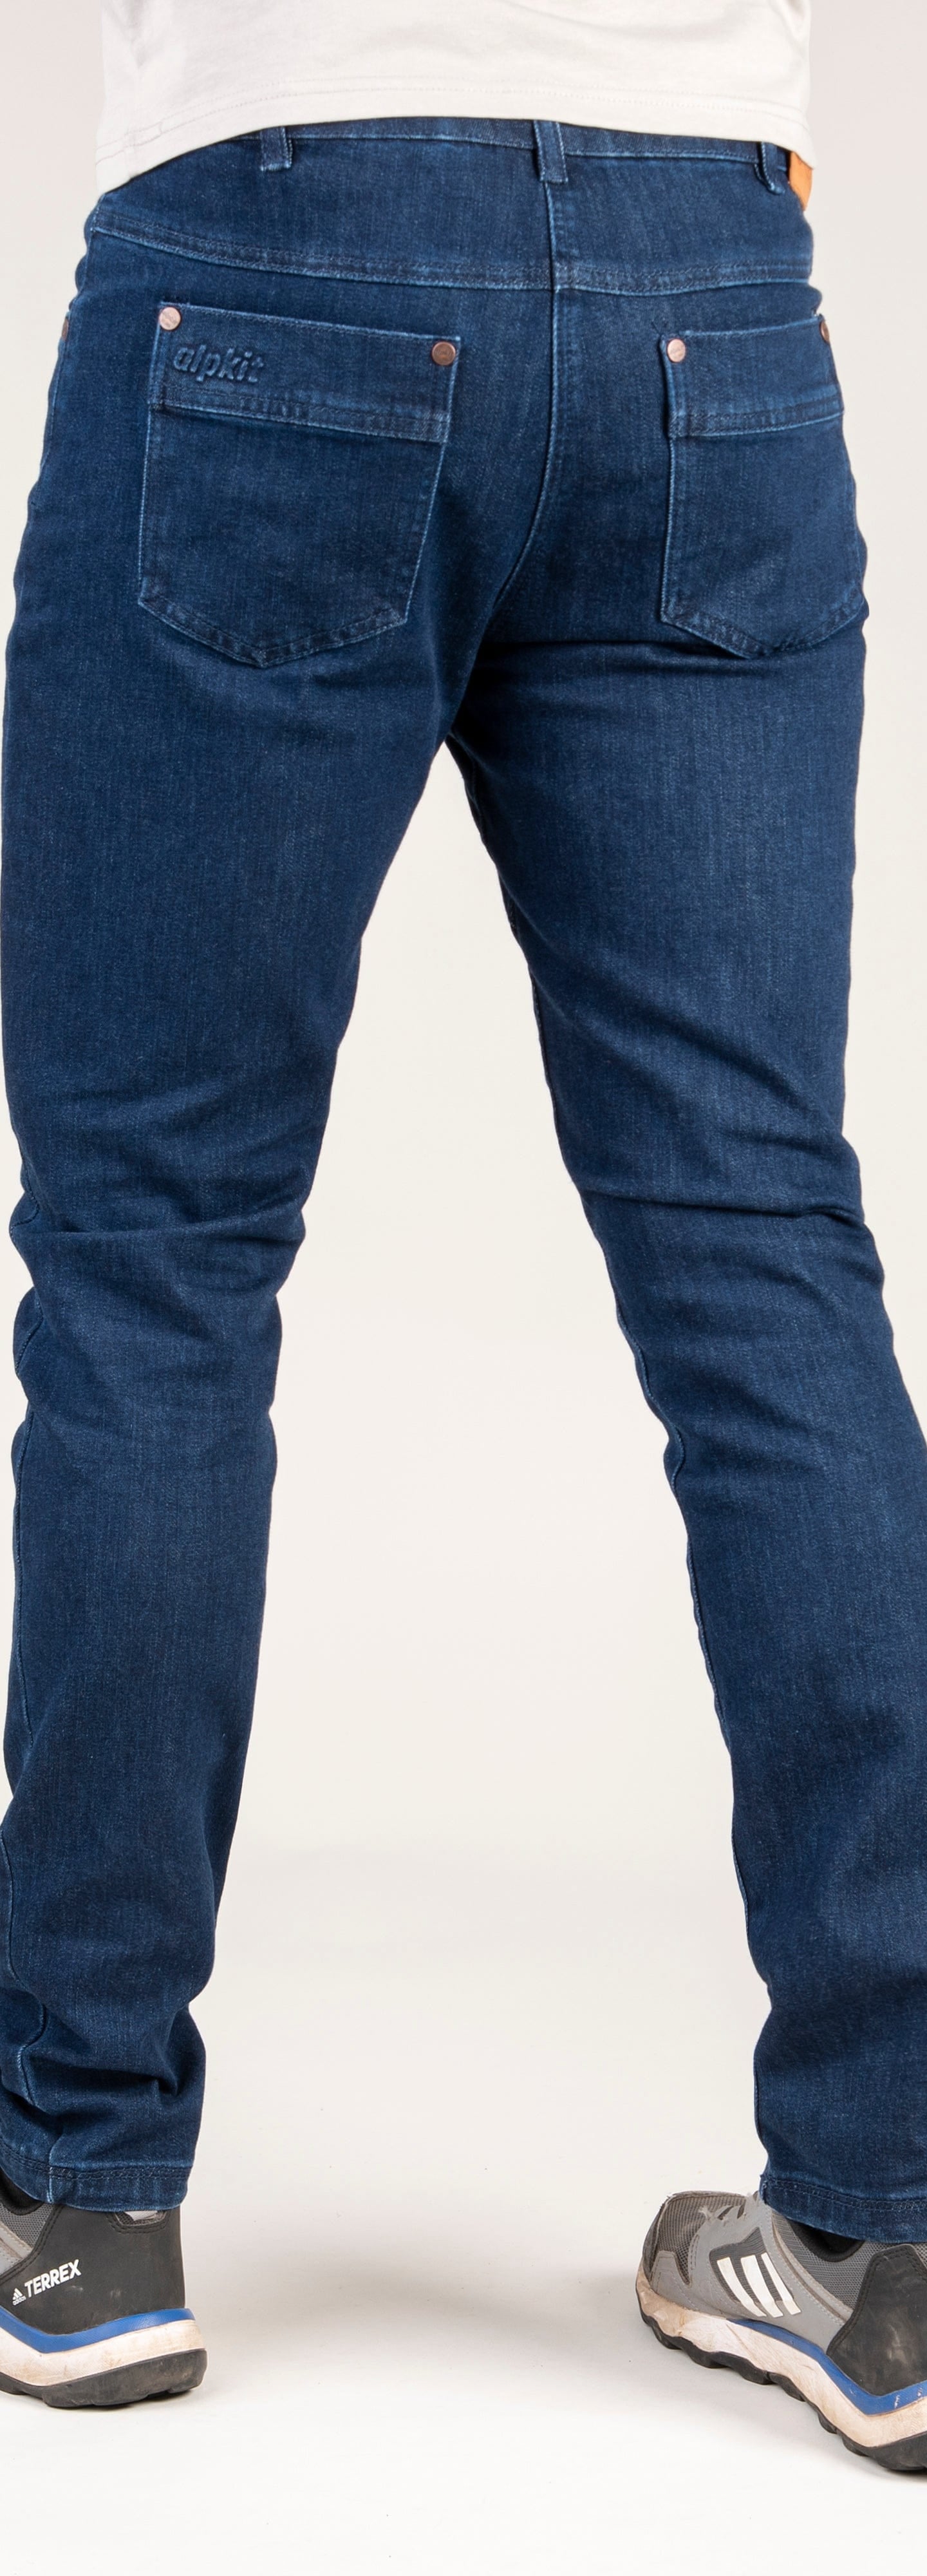 Men's Temperature Controlled Jeans - Express